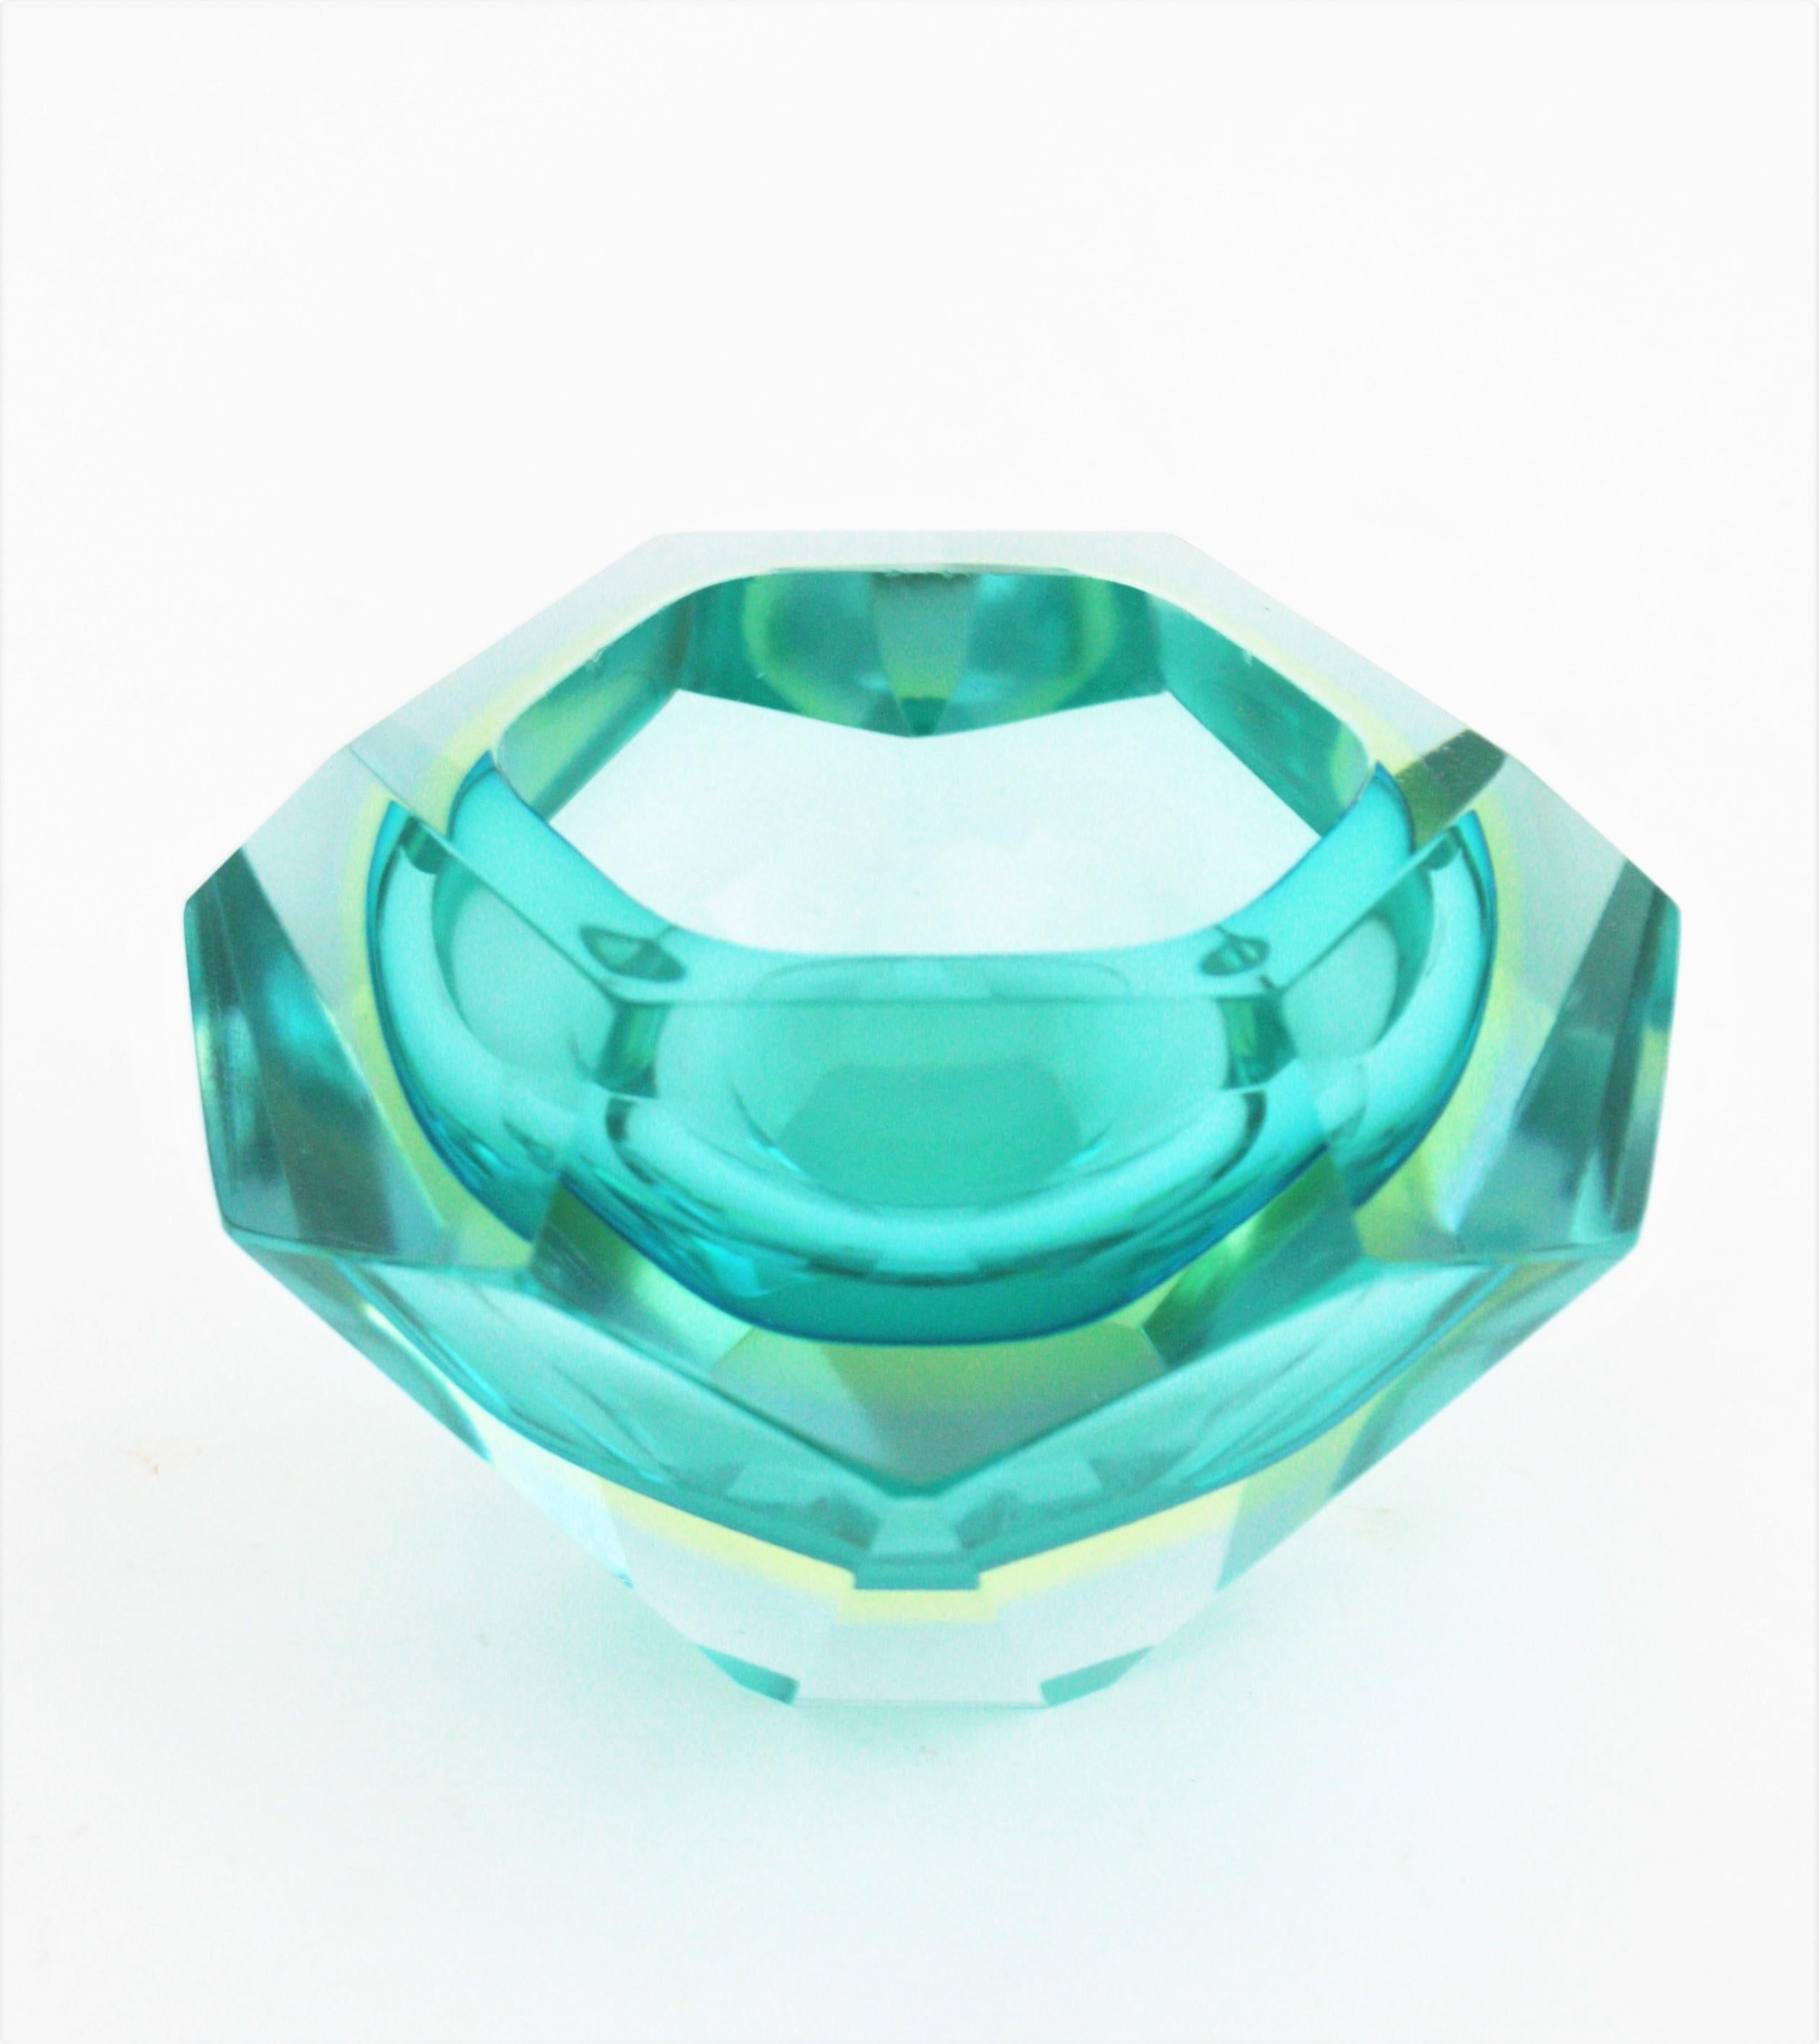 Italian Flavio Poli Sommerso Turquoise Blue Yellow Diamond Faceted Murano Art Glass Bowl For Sale